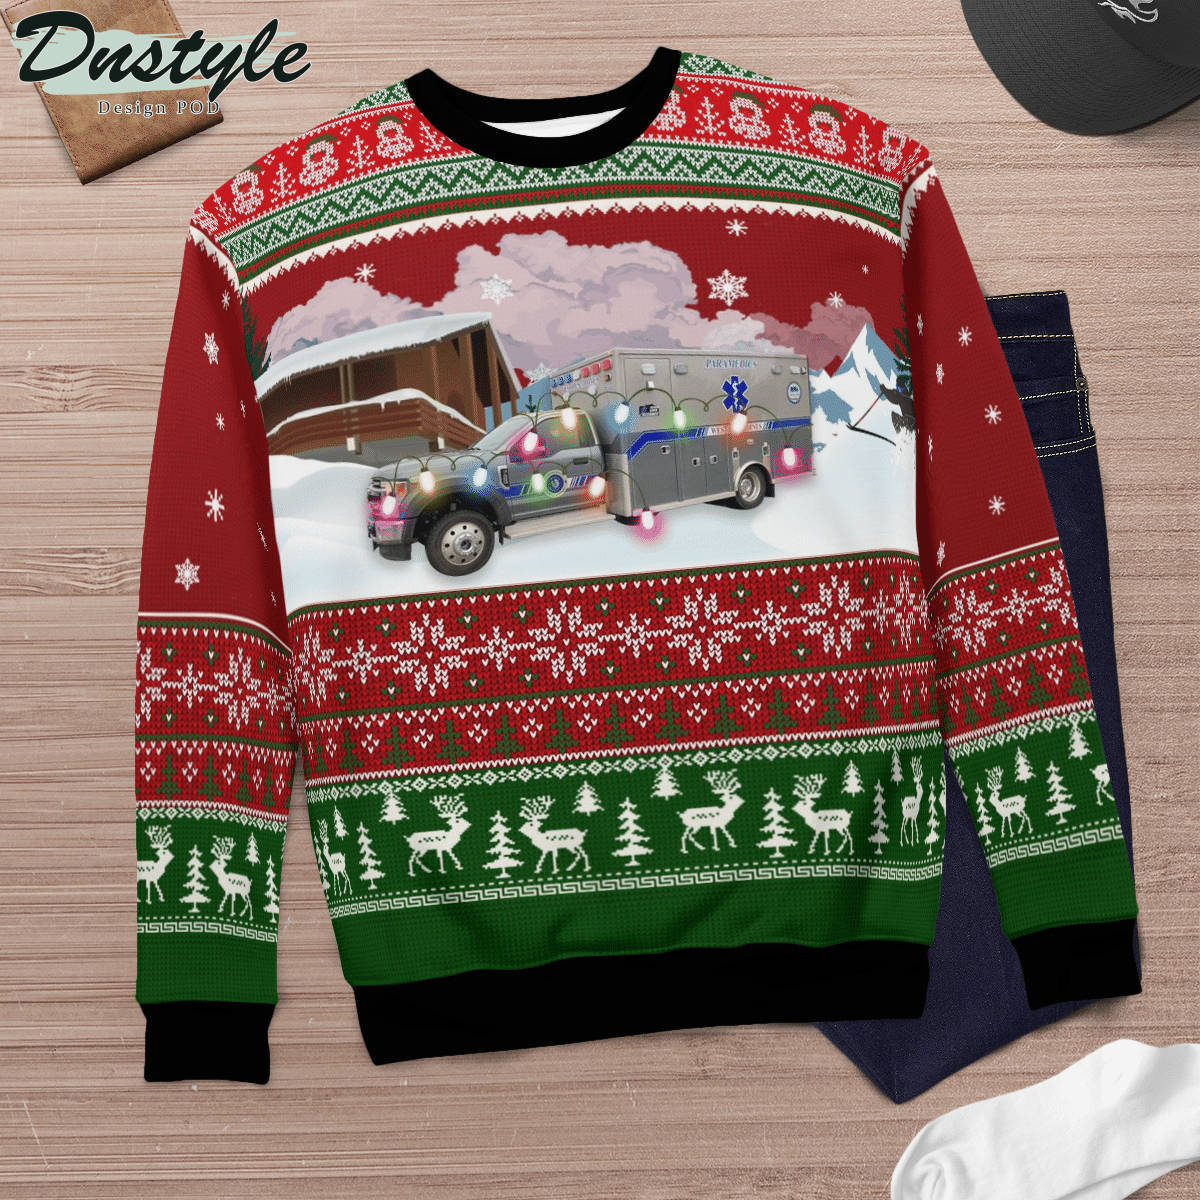 Iowa West Des Moines Emergency Medical Services Ugly Christmas Sweater